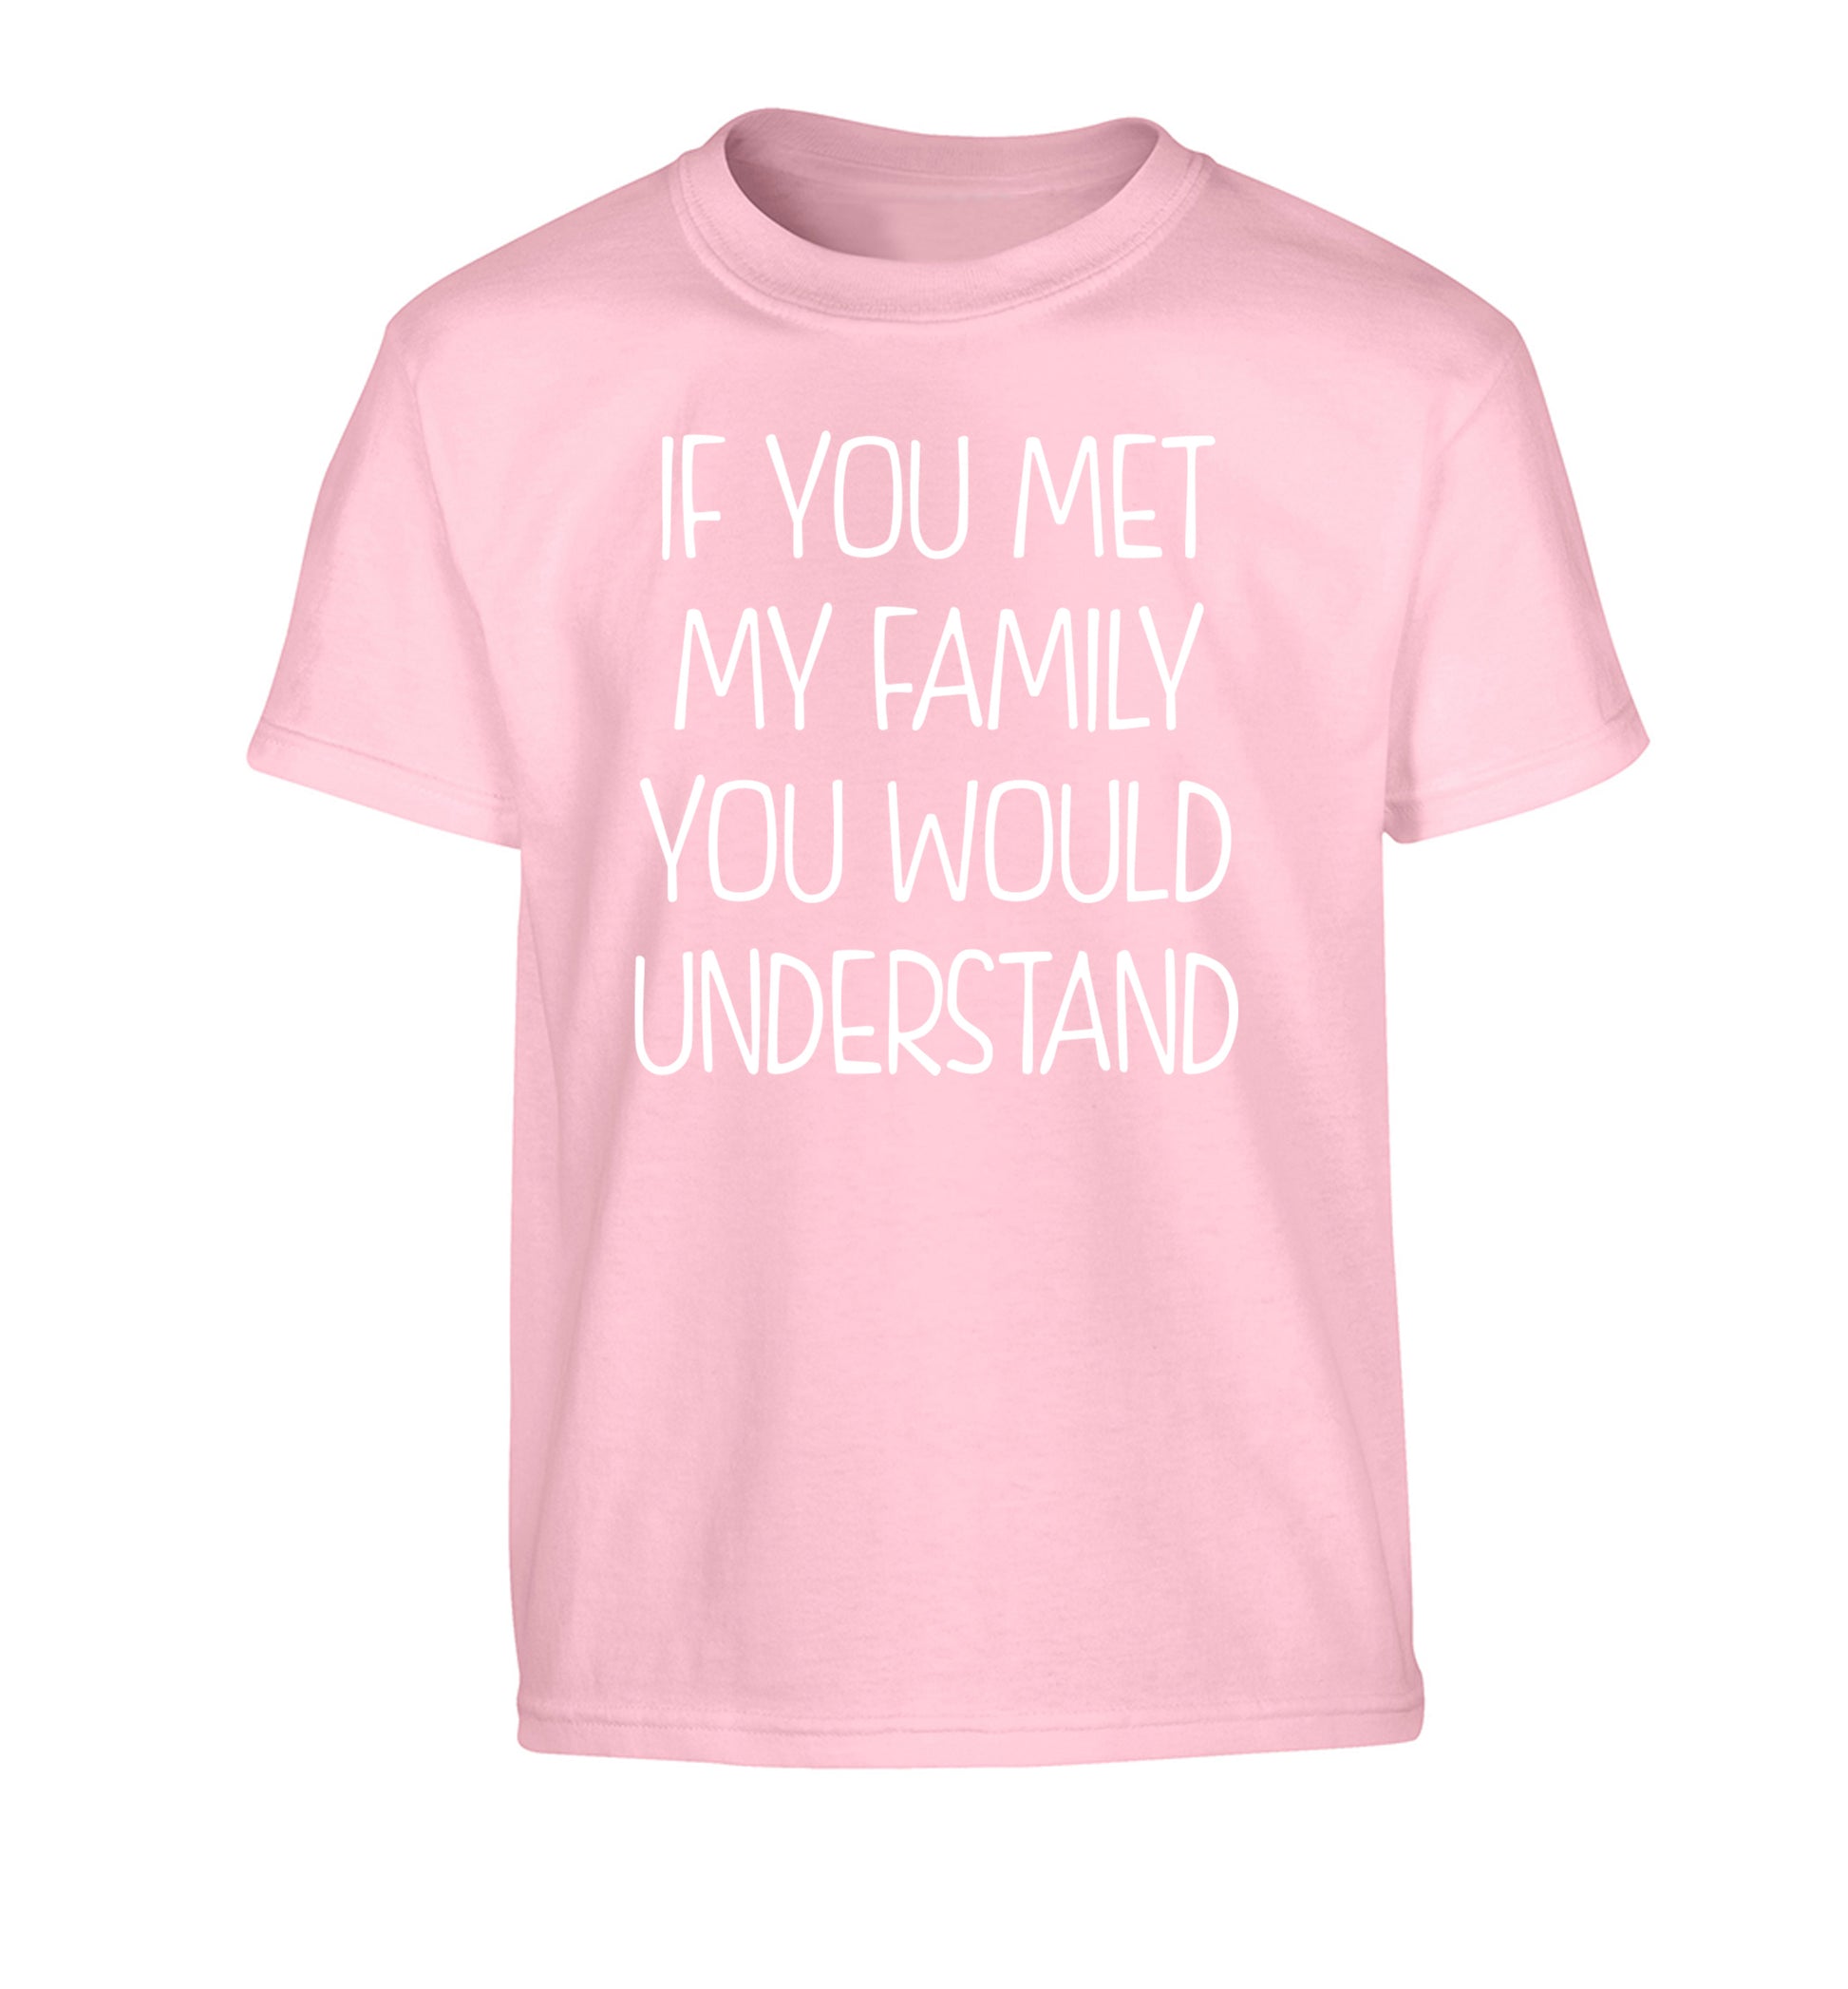 If you met my family you would understand Children's light pink Tshirt 12-13 Years